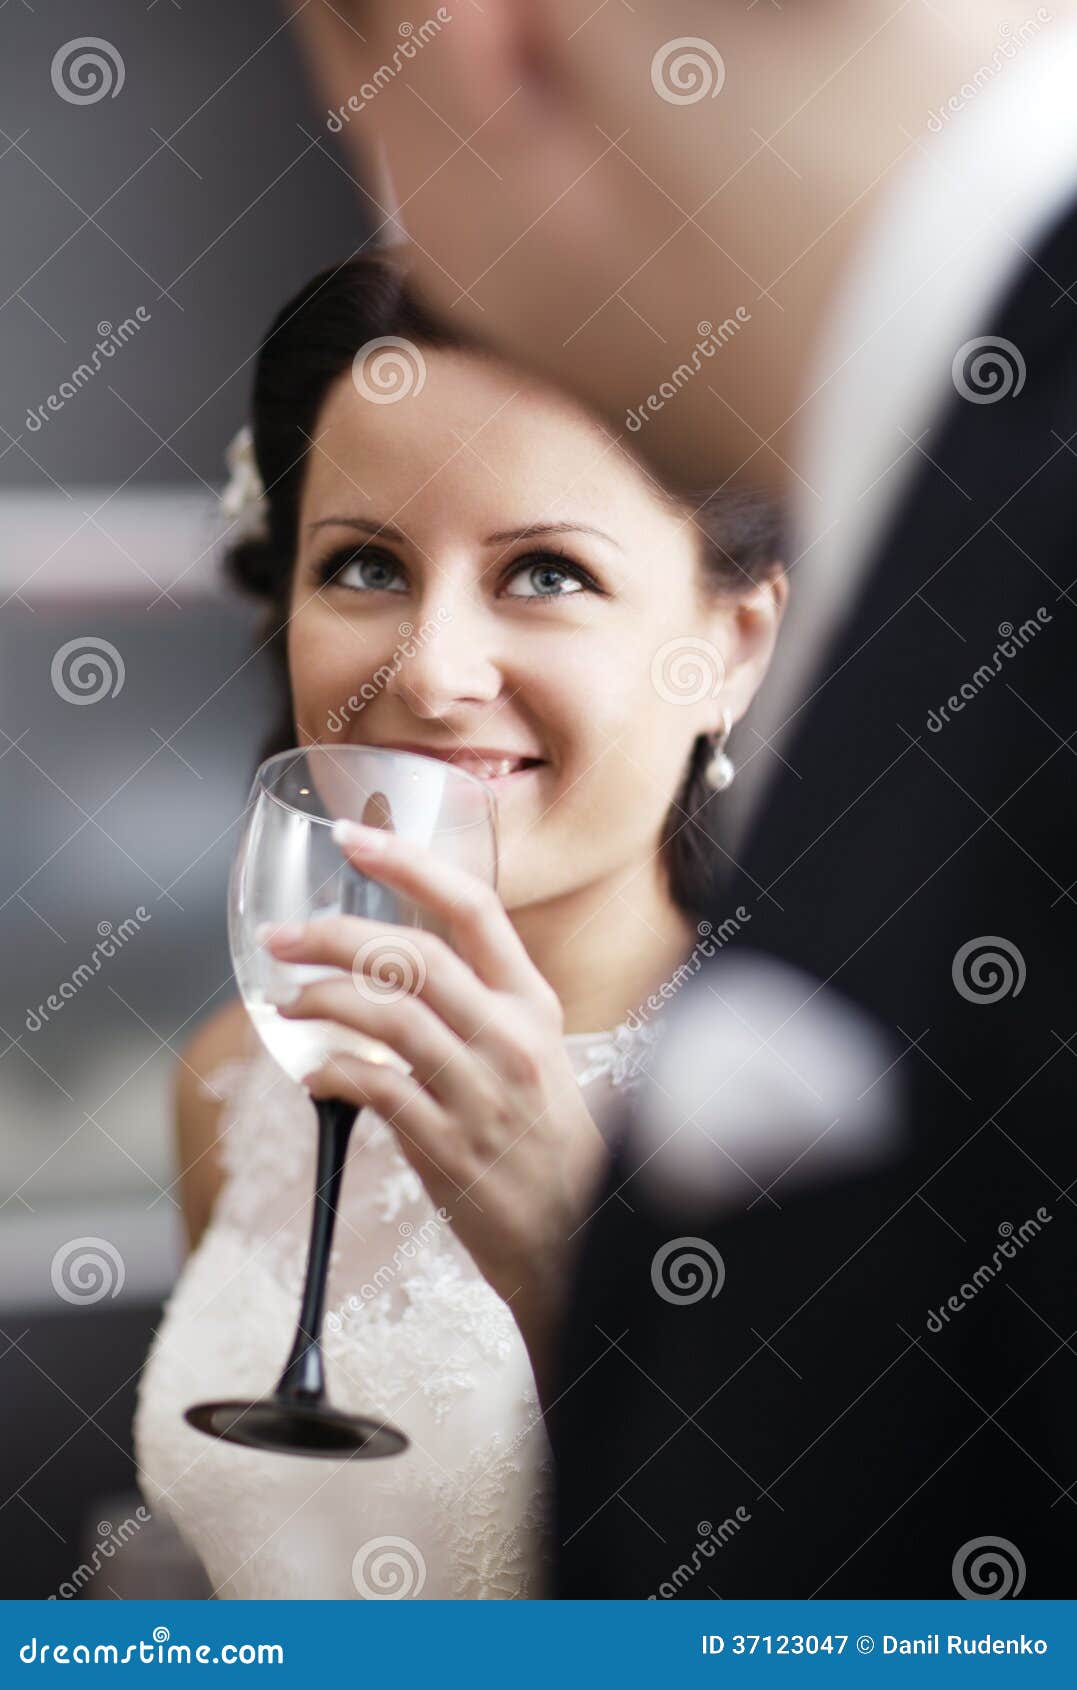 Businesswoman drinking from large wine glass with straw stock